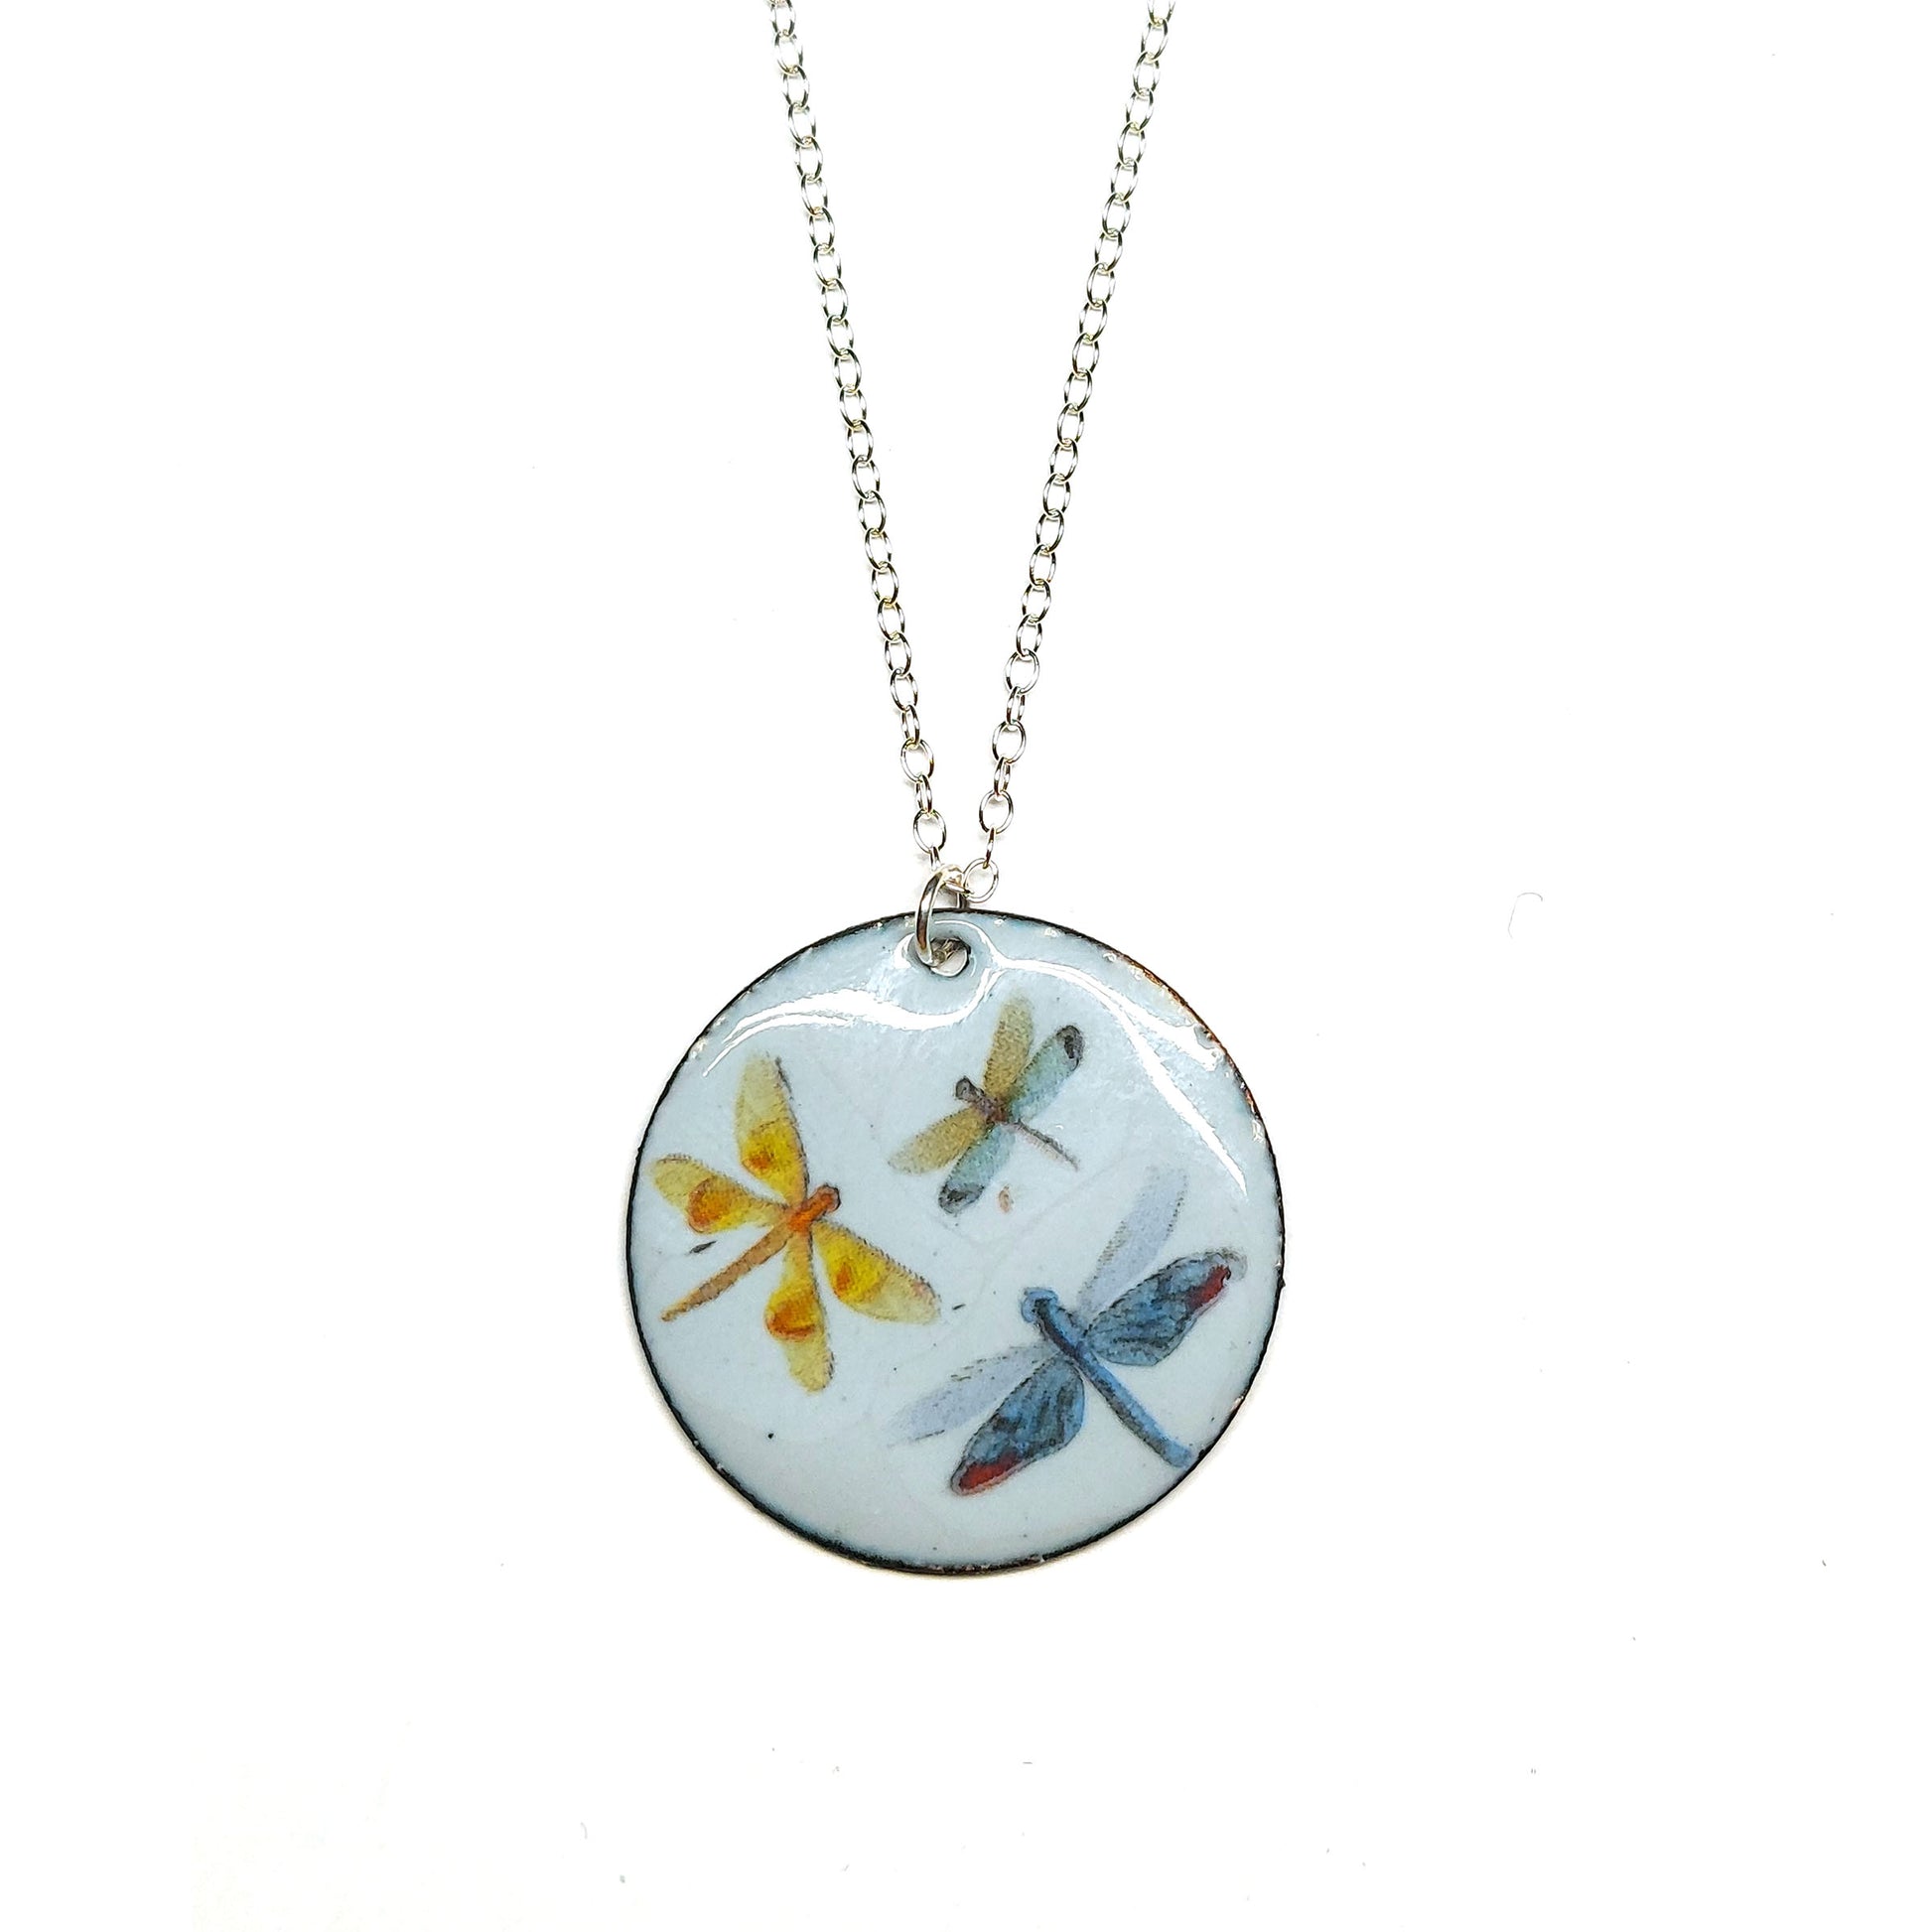 A round enamel pendant hangs from a silver chain. The pendant has a light grey background and 3 dragonflies on it.